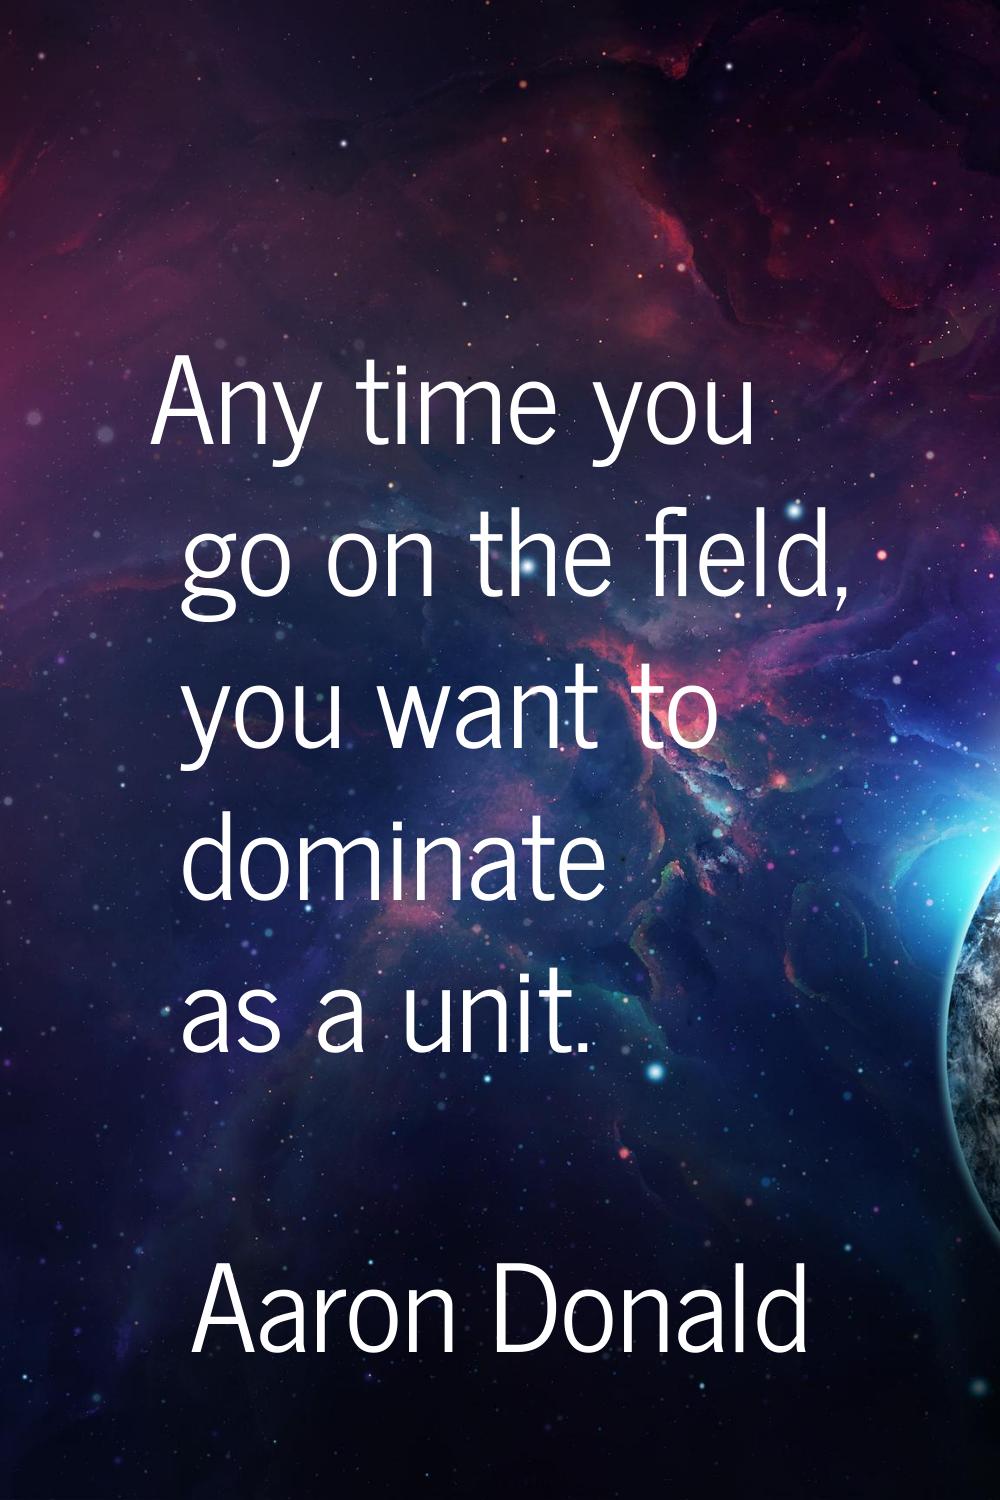 Any time you go on the field, you want to dominate as a unit.